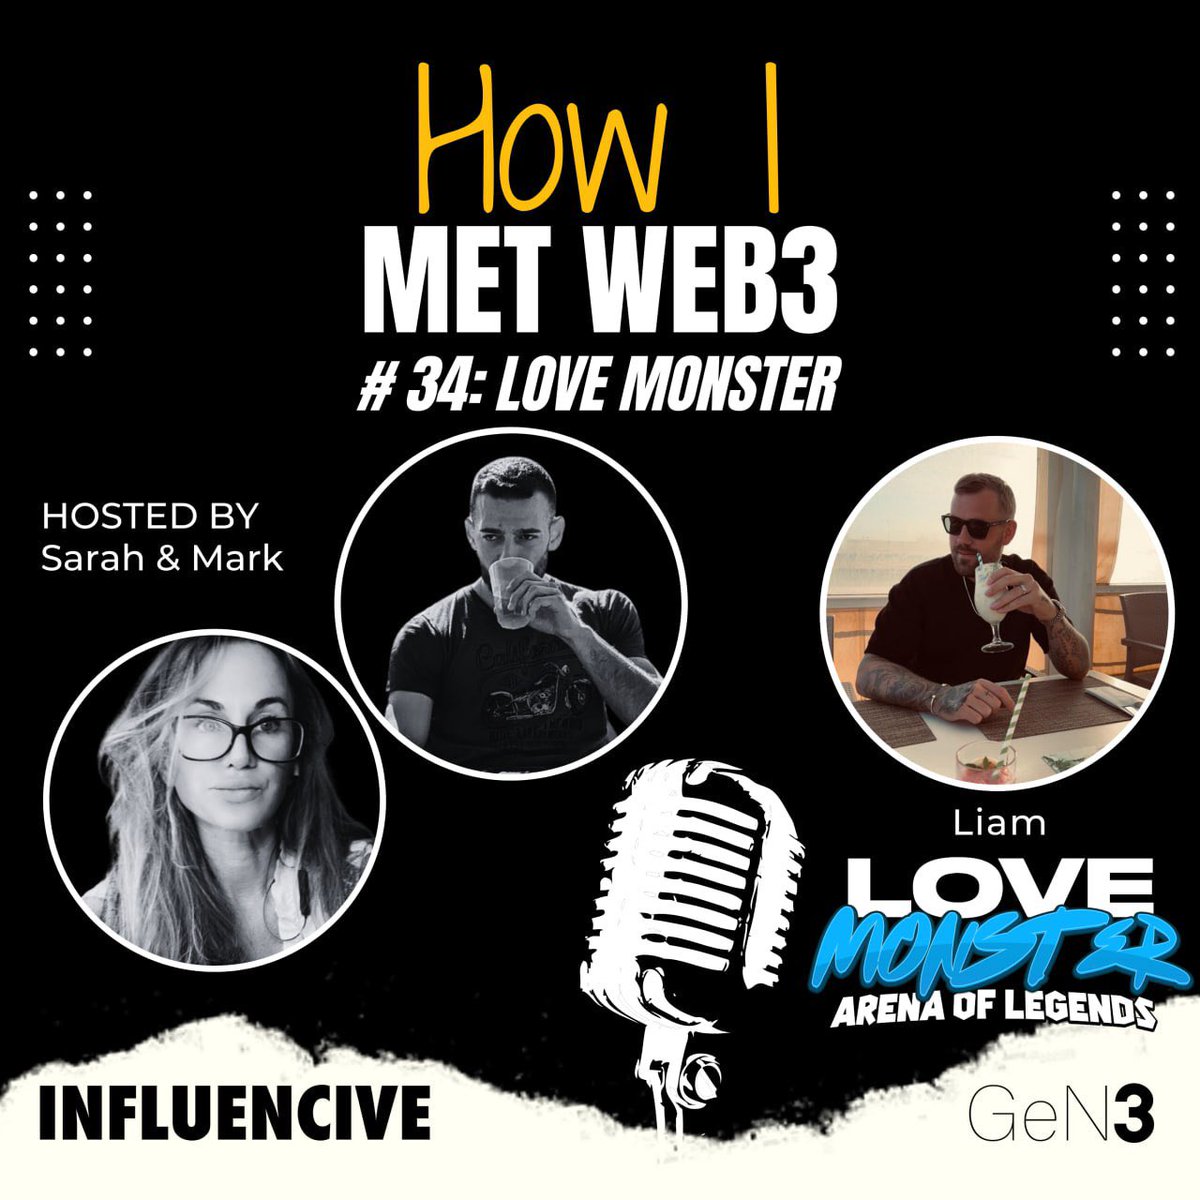 🎙️#34: Love Monster @block_editor and @mhl_eth interview @iamliamlove of @PlayLoveMonster discussing his background, project development, and the upcoming token launch. 😈 Listen/subscribe: open.spotify.com/episode/7qqPBy…